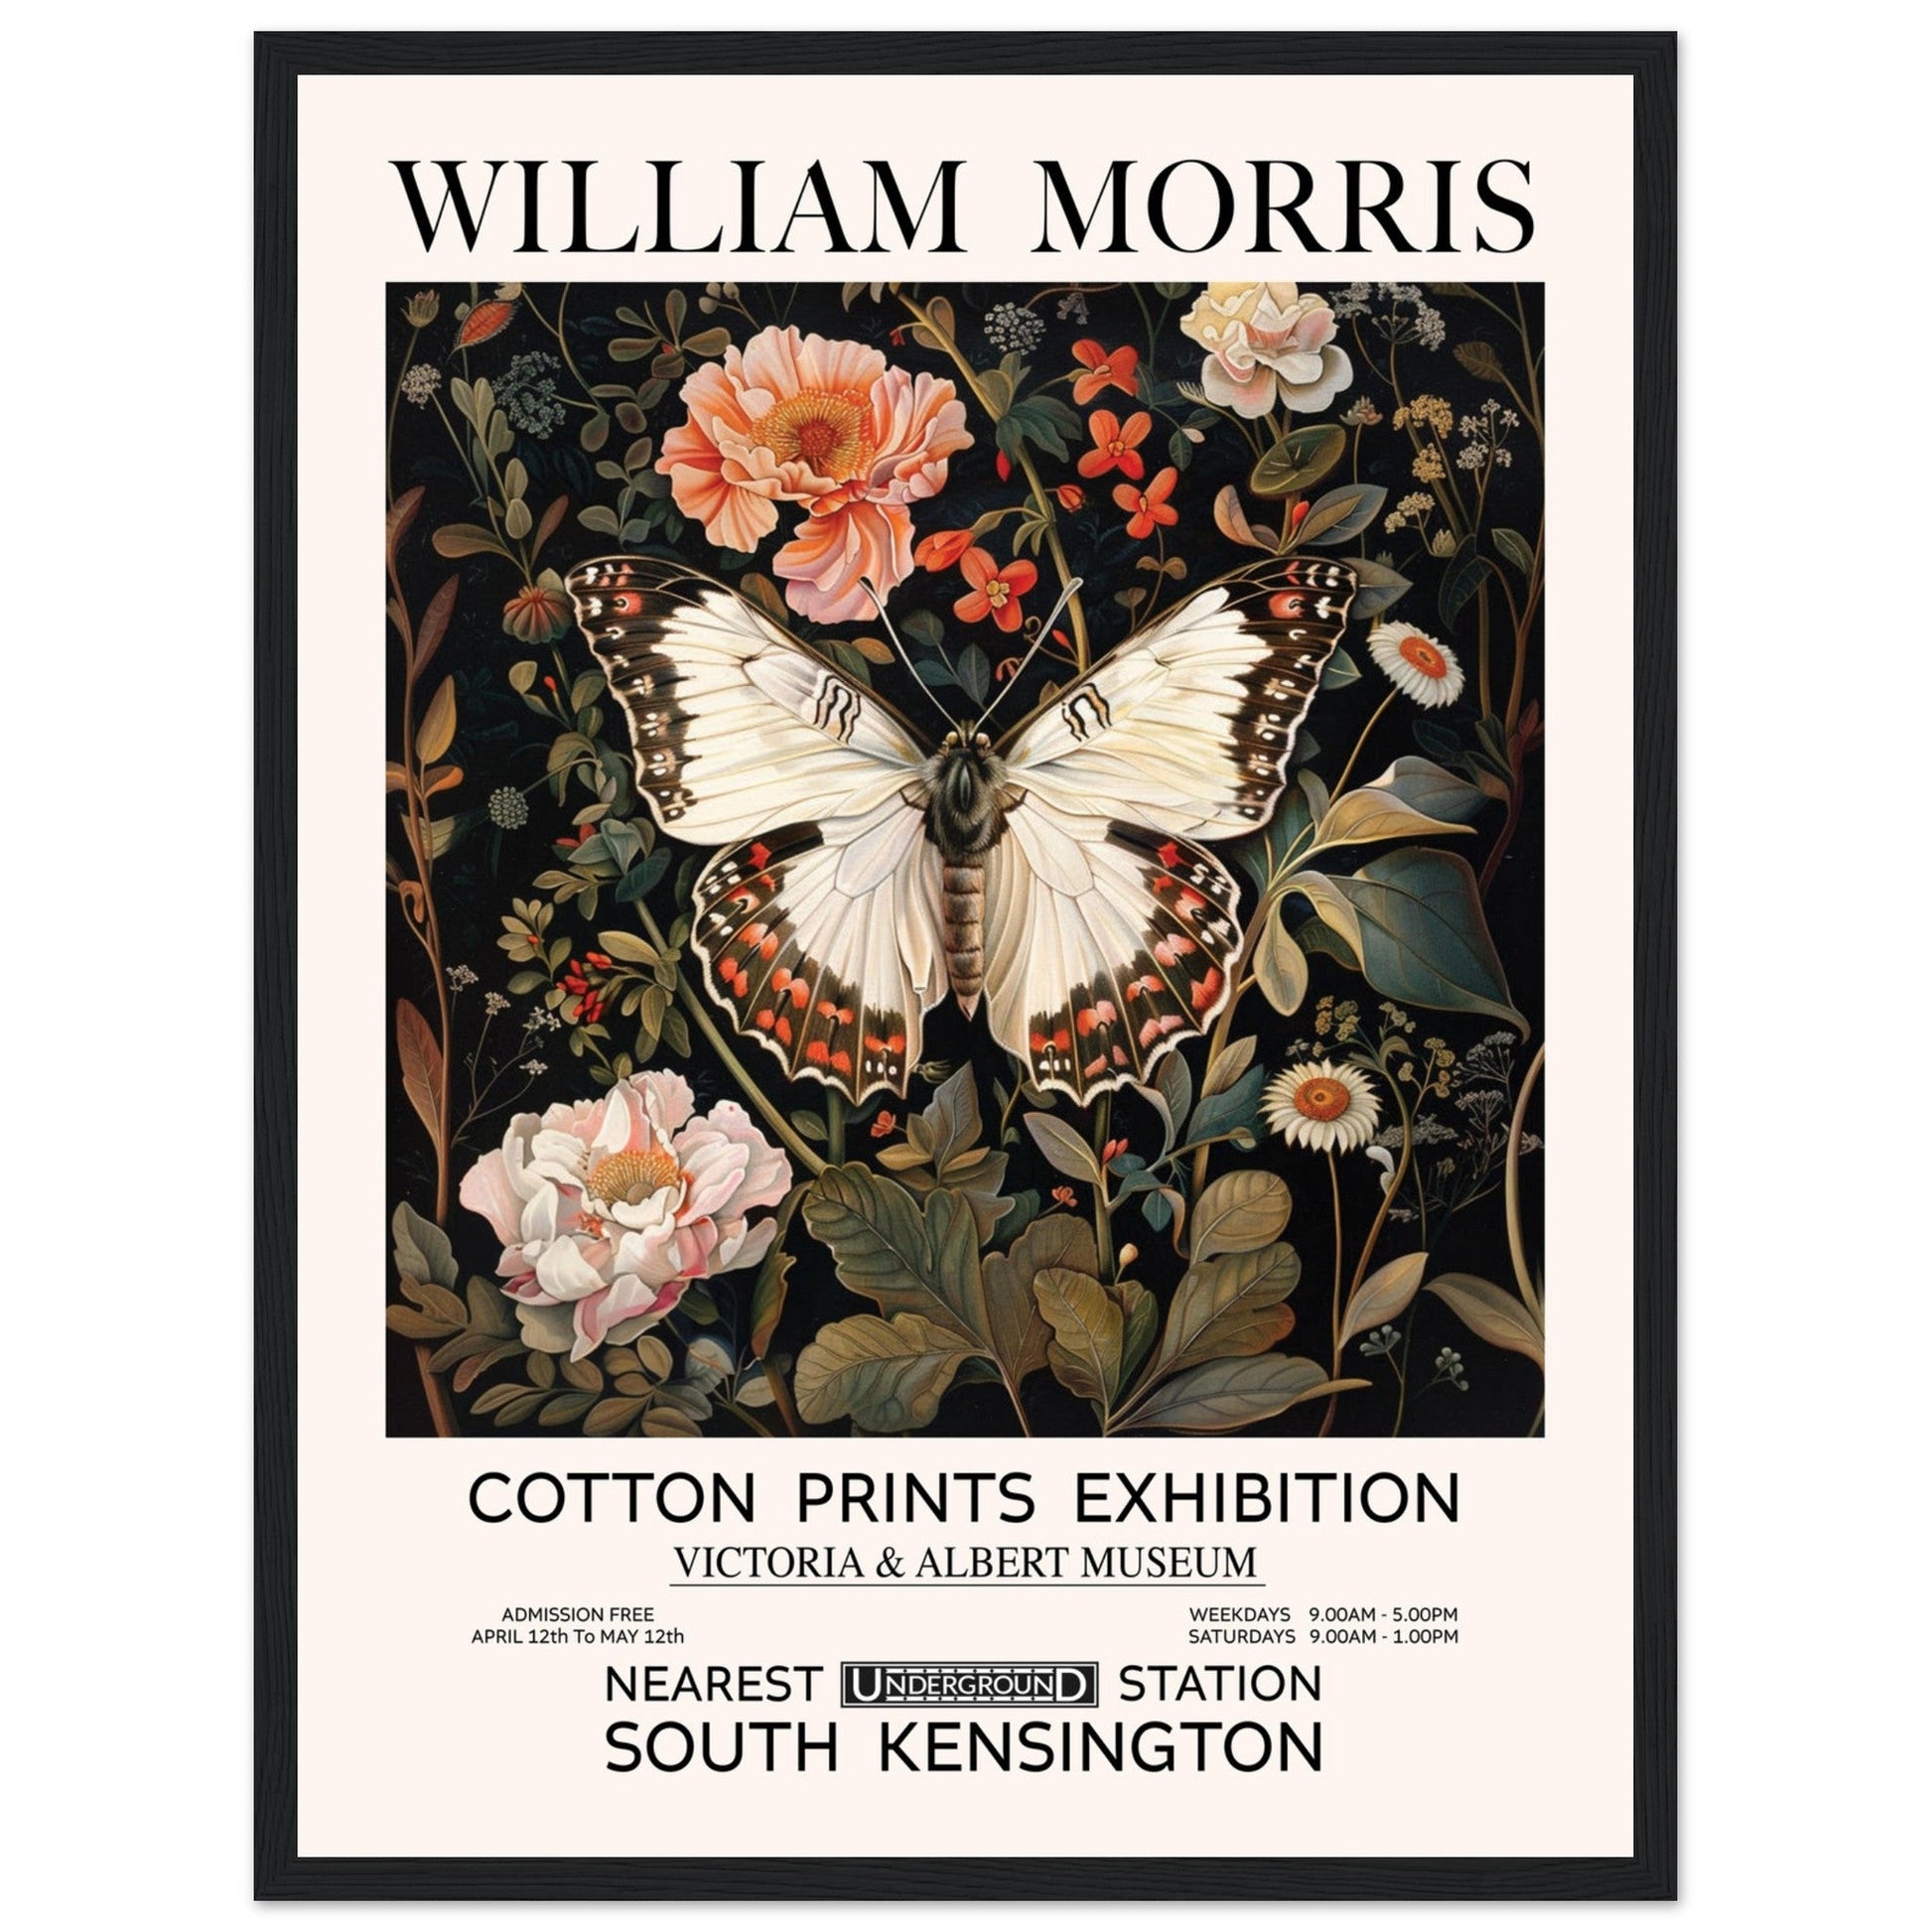 White Butterfly And Flowers - William Morris, Black and white, william morris, william morris framed, #illieeart